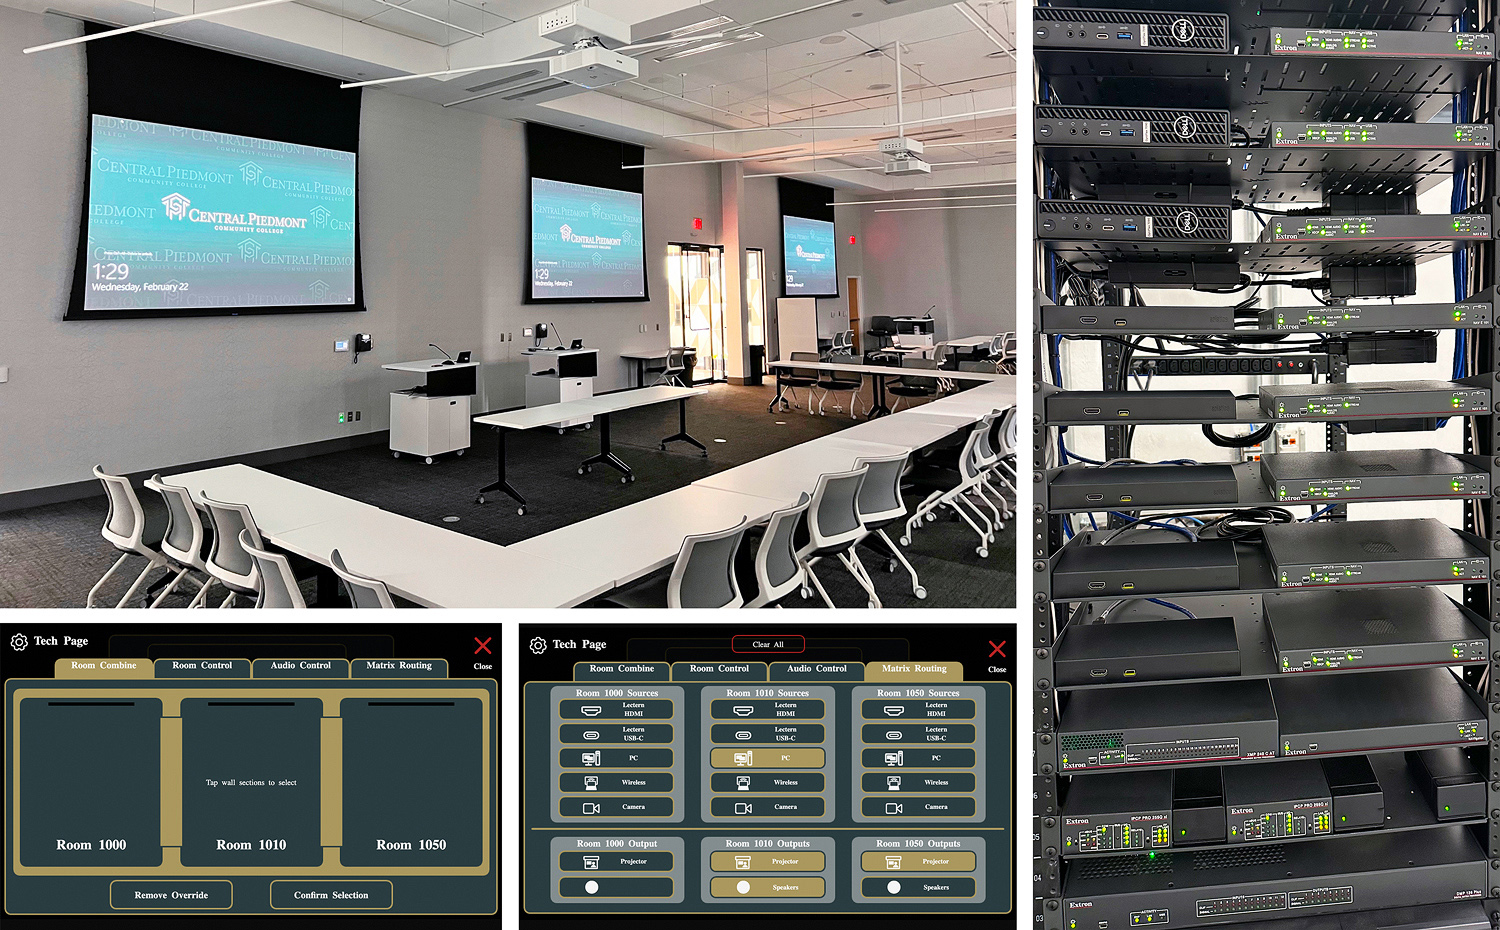 The multipurpose rooms are divisible by motorized partitions to accommodate groups of varying sizes. Intuitive touchpanel GUIs guide users through room control and AV system control operations.